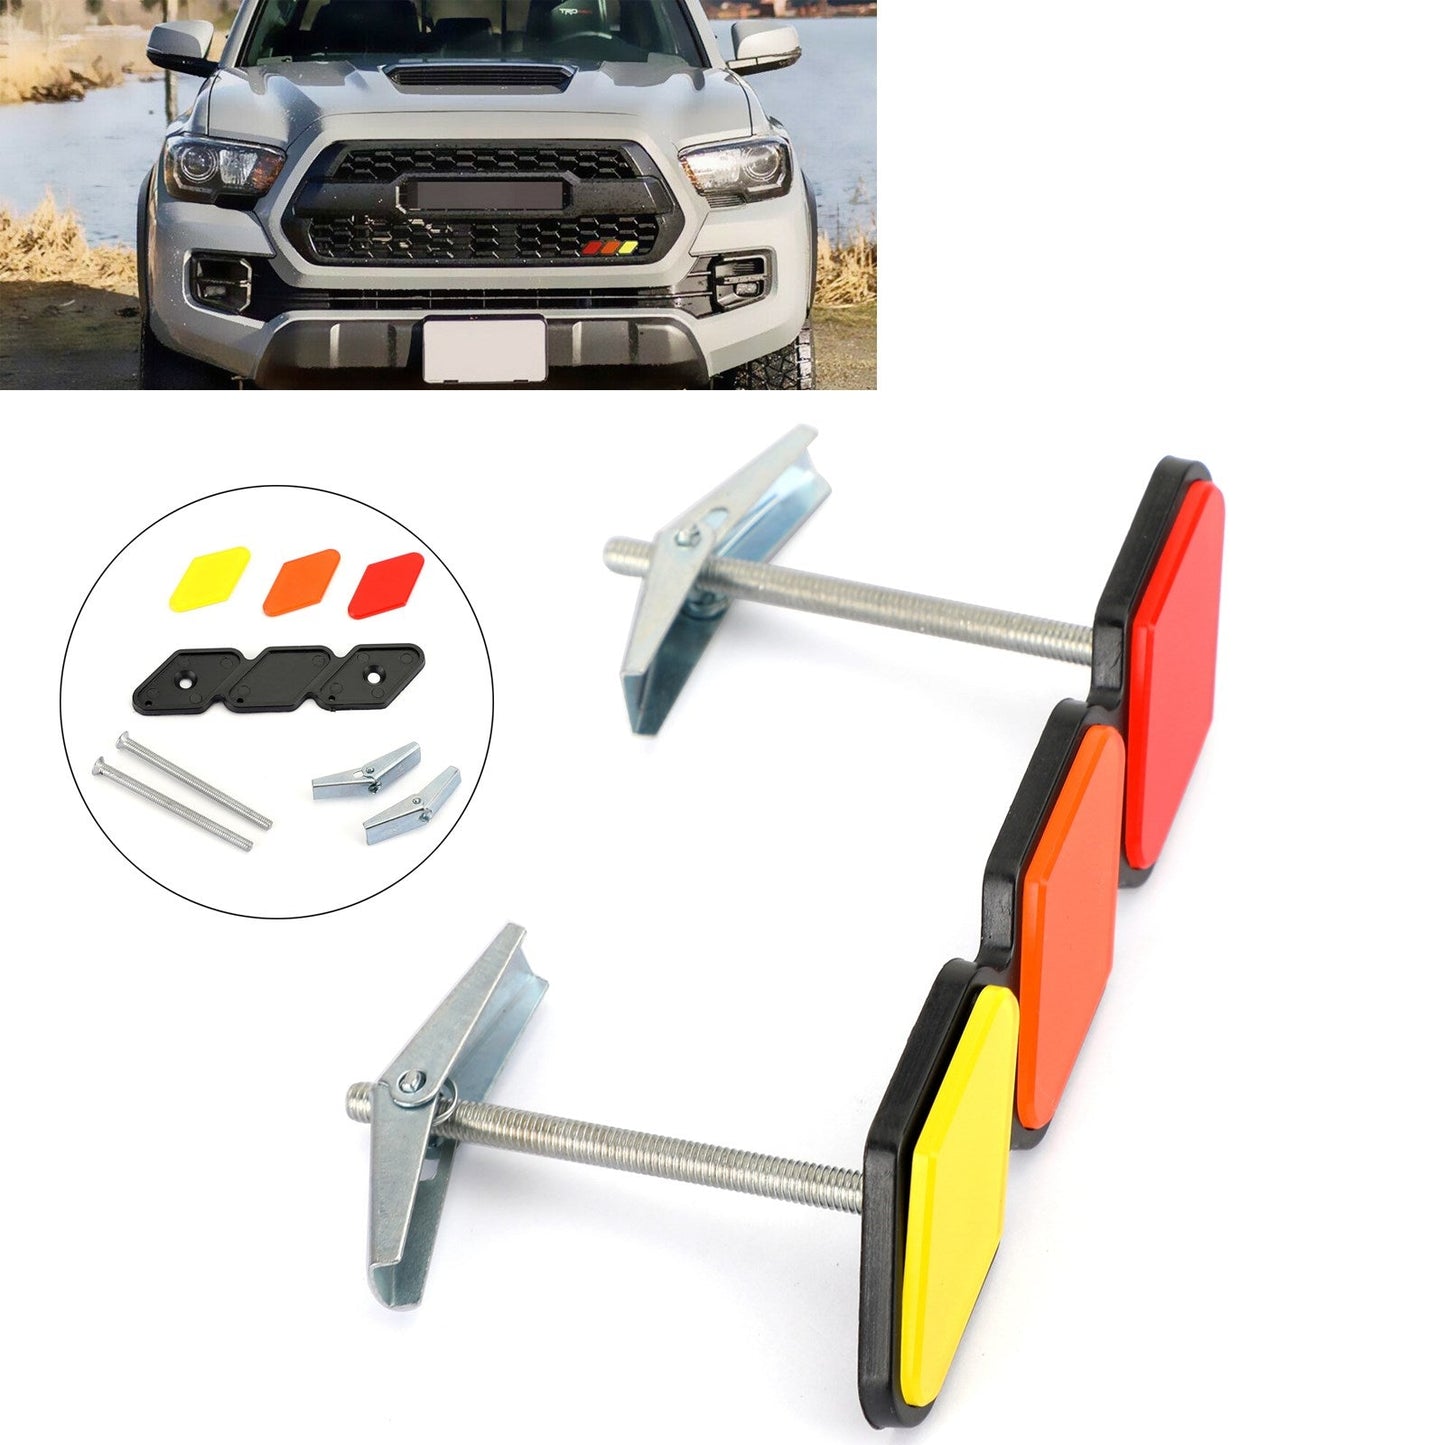 High Quality Toyota Trd Emblem Tri Color Grill Acrylic Badge Fit For Toyota Tacoma 4Runner Tacoma TRD Pro Front Grille 10-19 A